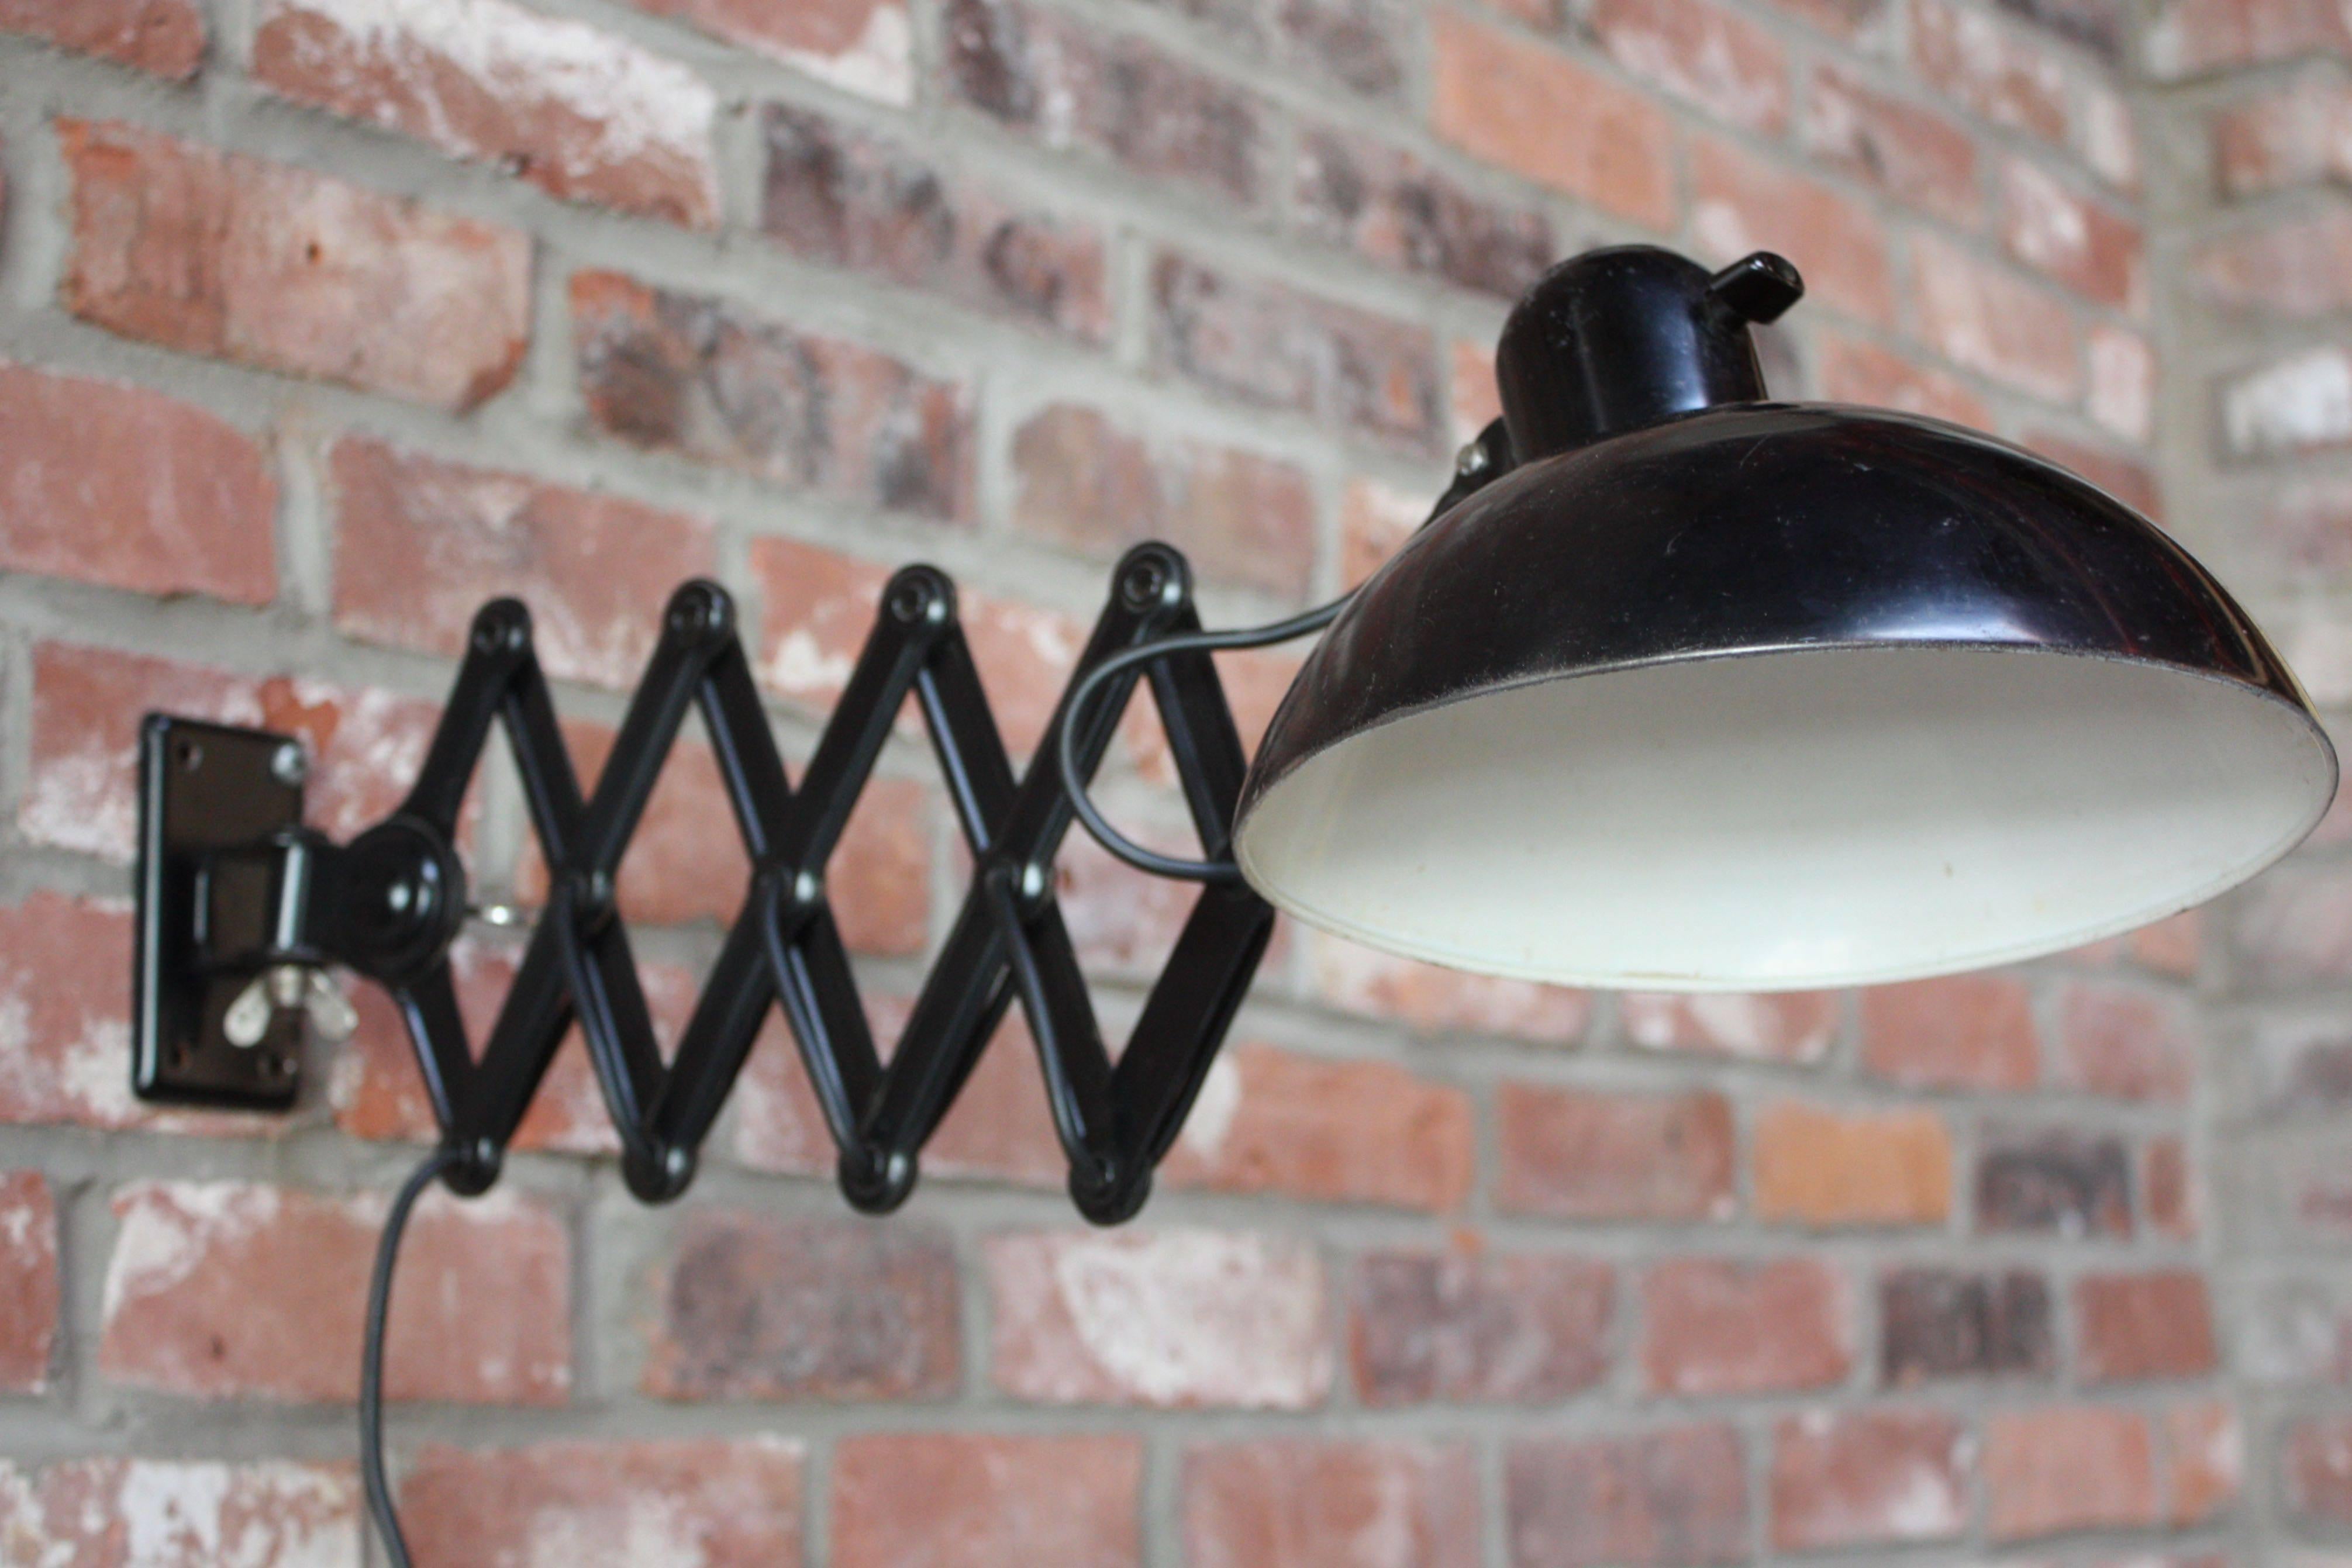 1930s Industrial / Bauhaus style Christian Dell for Kaiser Idell 'accordion' lamp with adjustable and extendable shade (smaller version - can be extended from 12